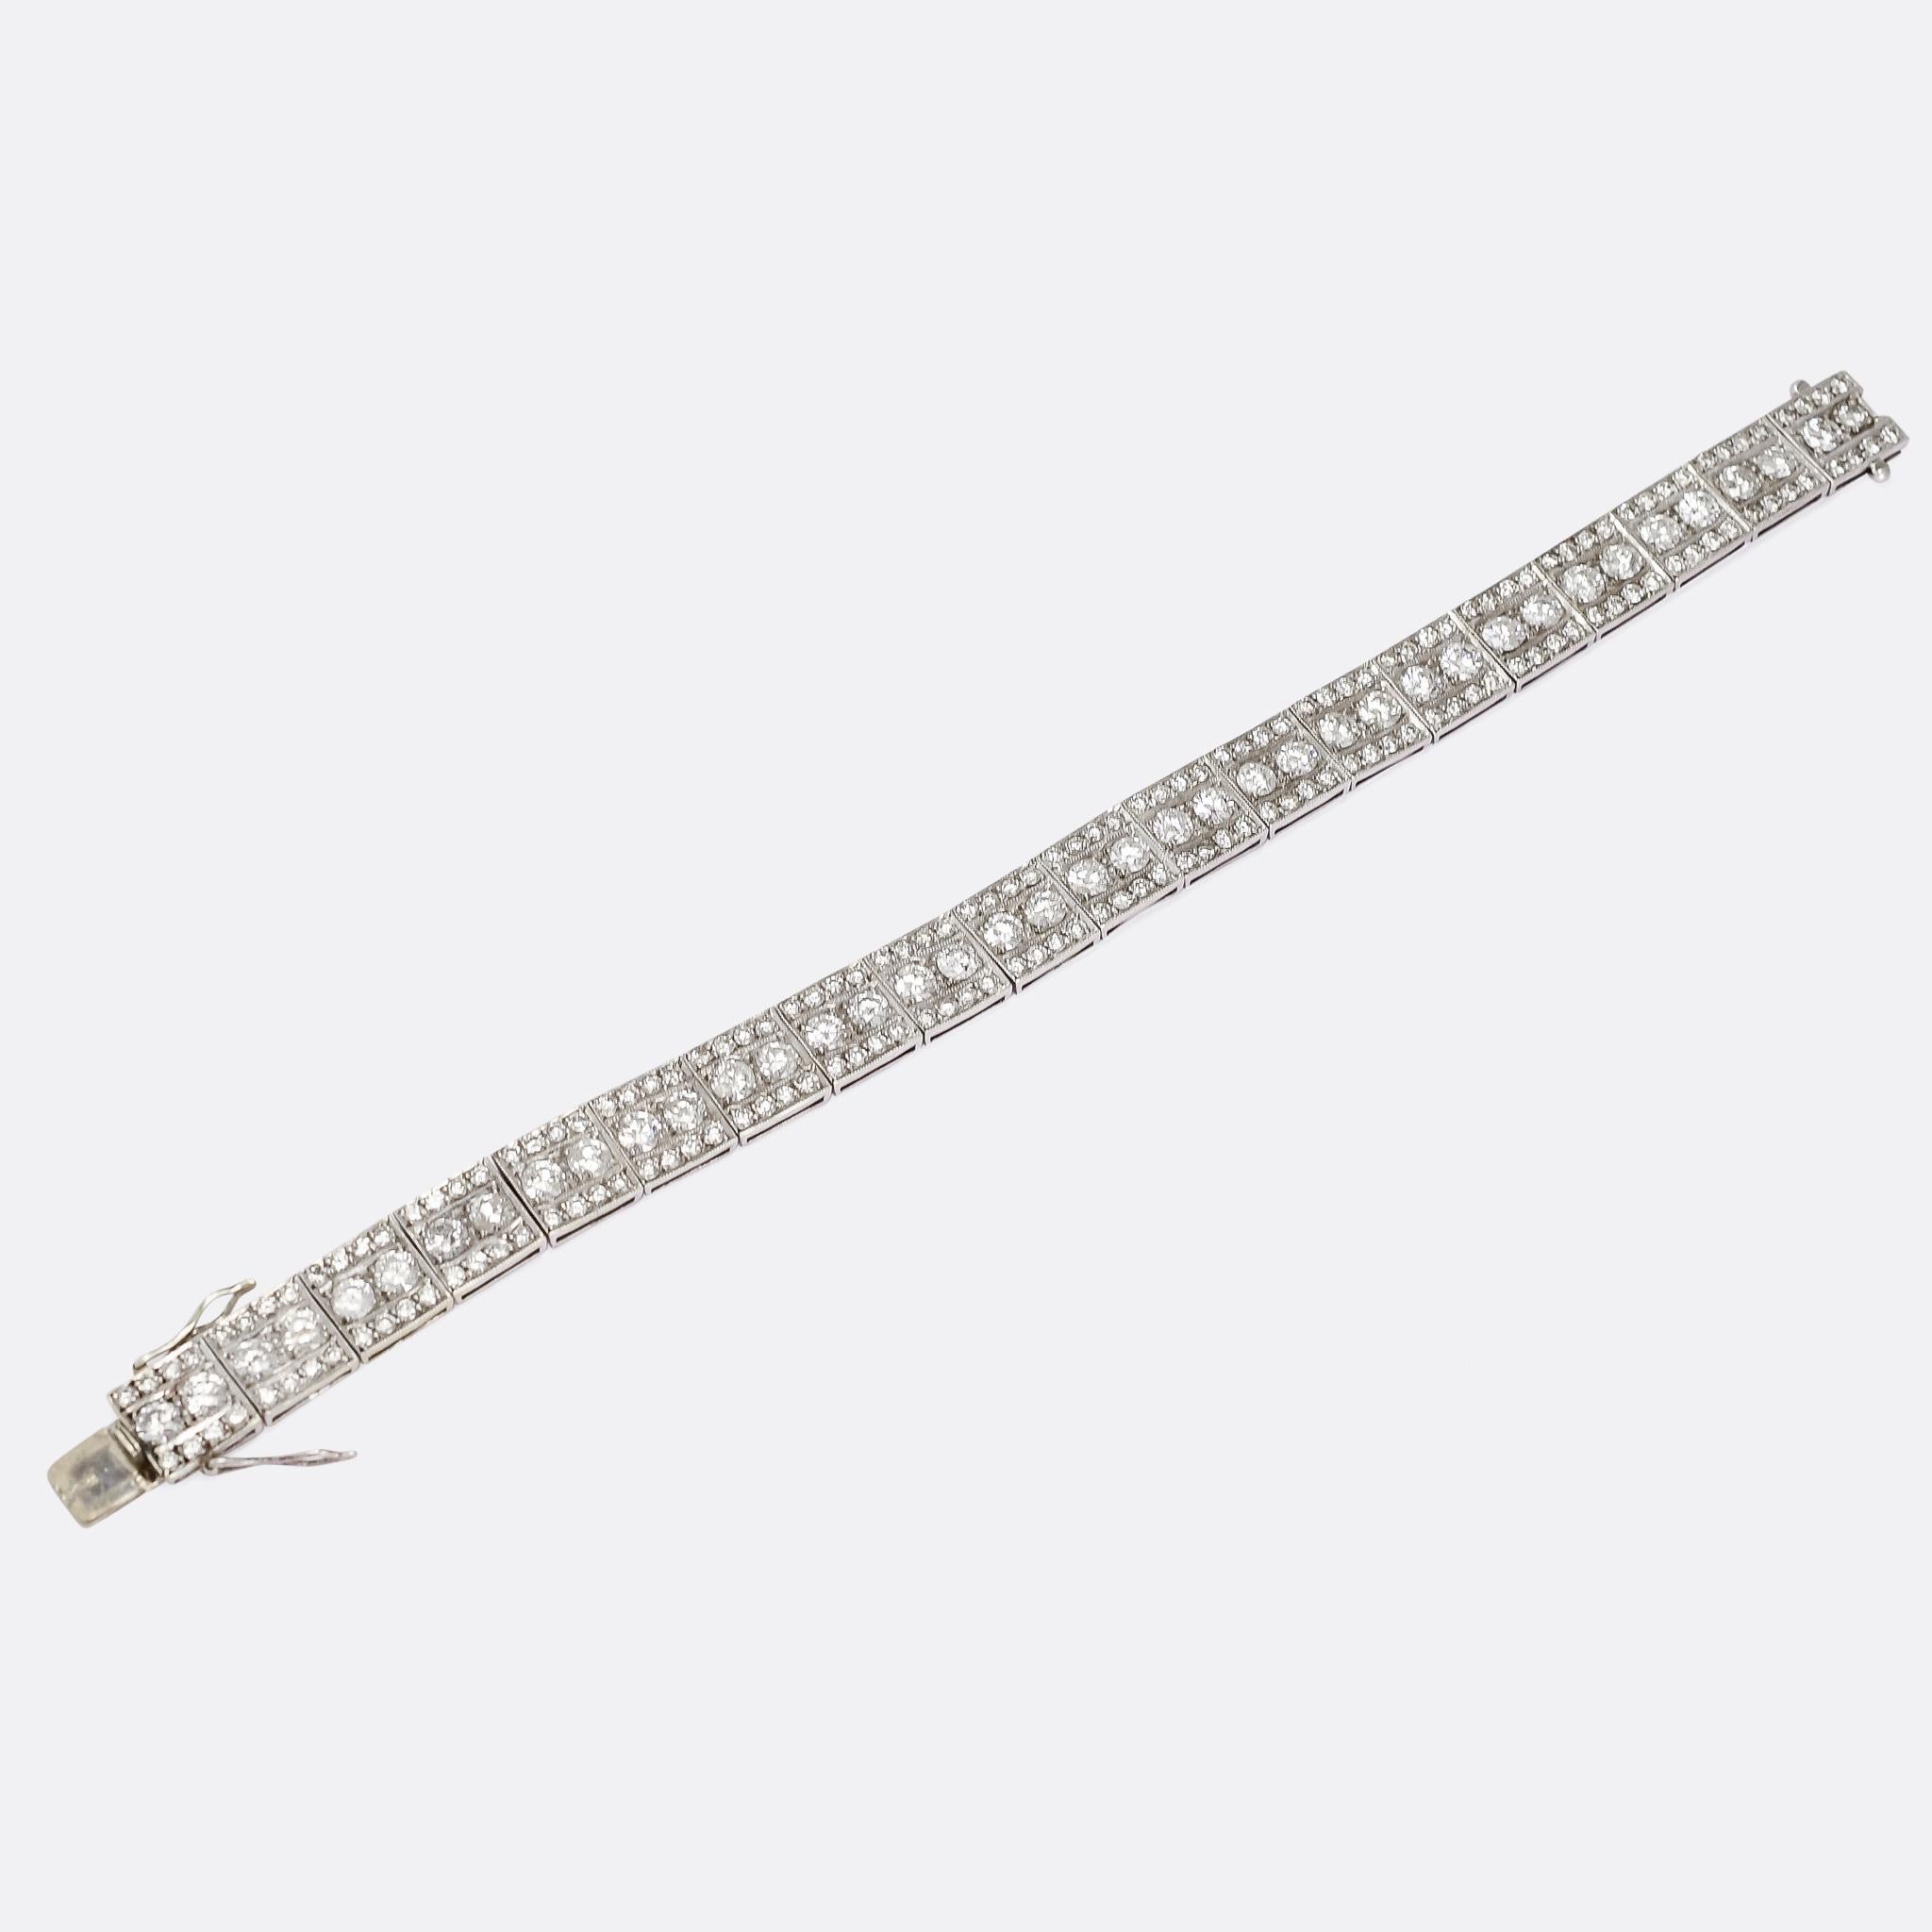 A stunning Art Deco diamond millegrain bracelet dating from the 1920s. It's made up of twenty articulated square panels, each one home to .40cts of brilliant cut diamonds in finely worked millegrain platinum settings - with a total diamond weight of